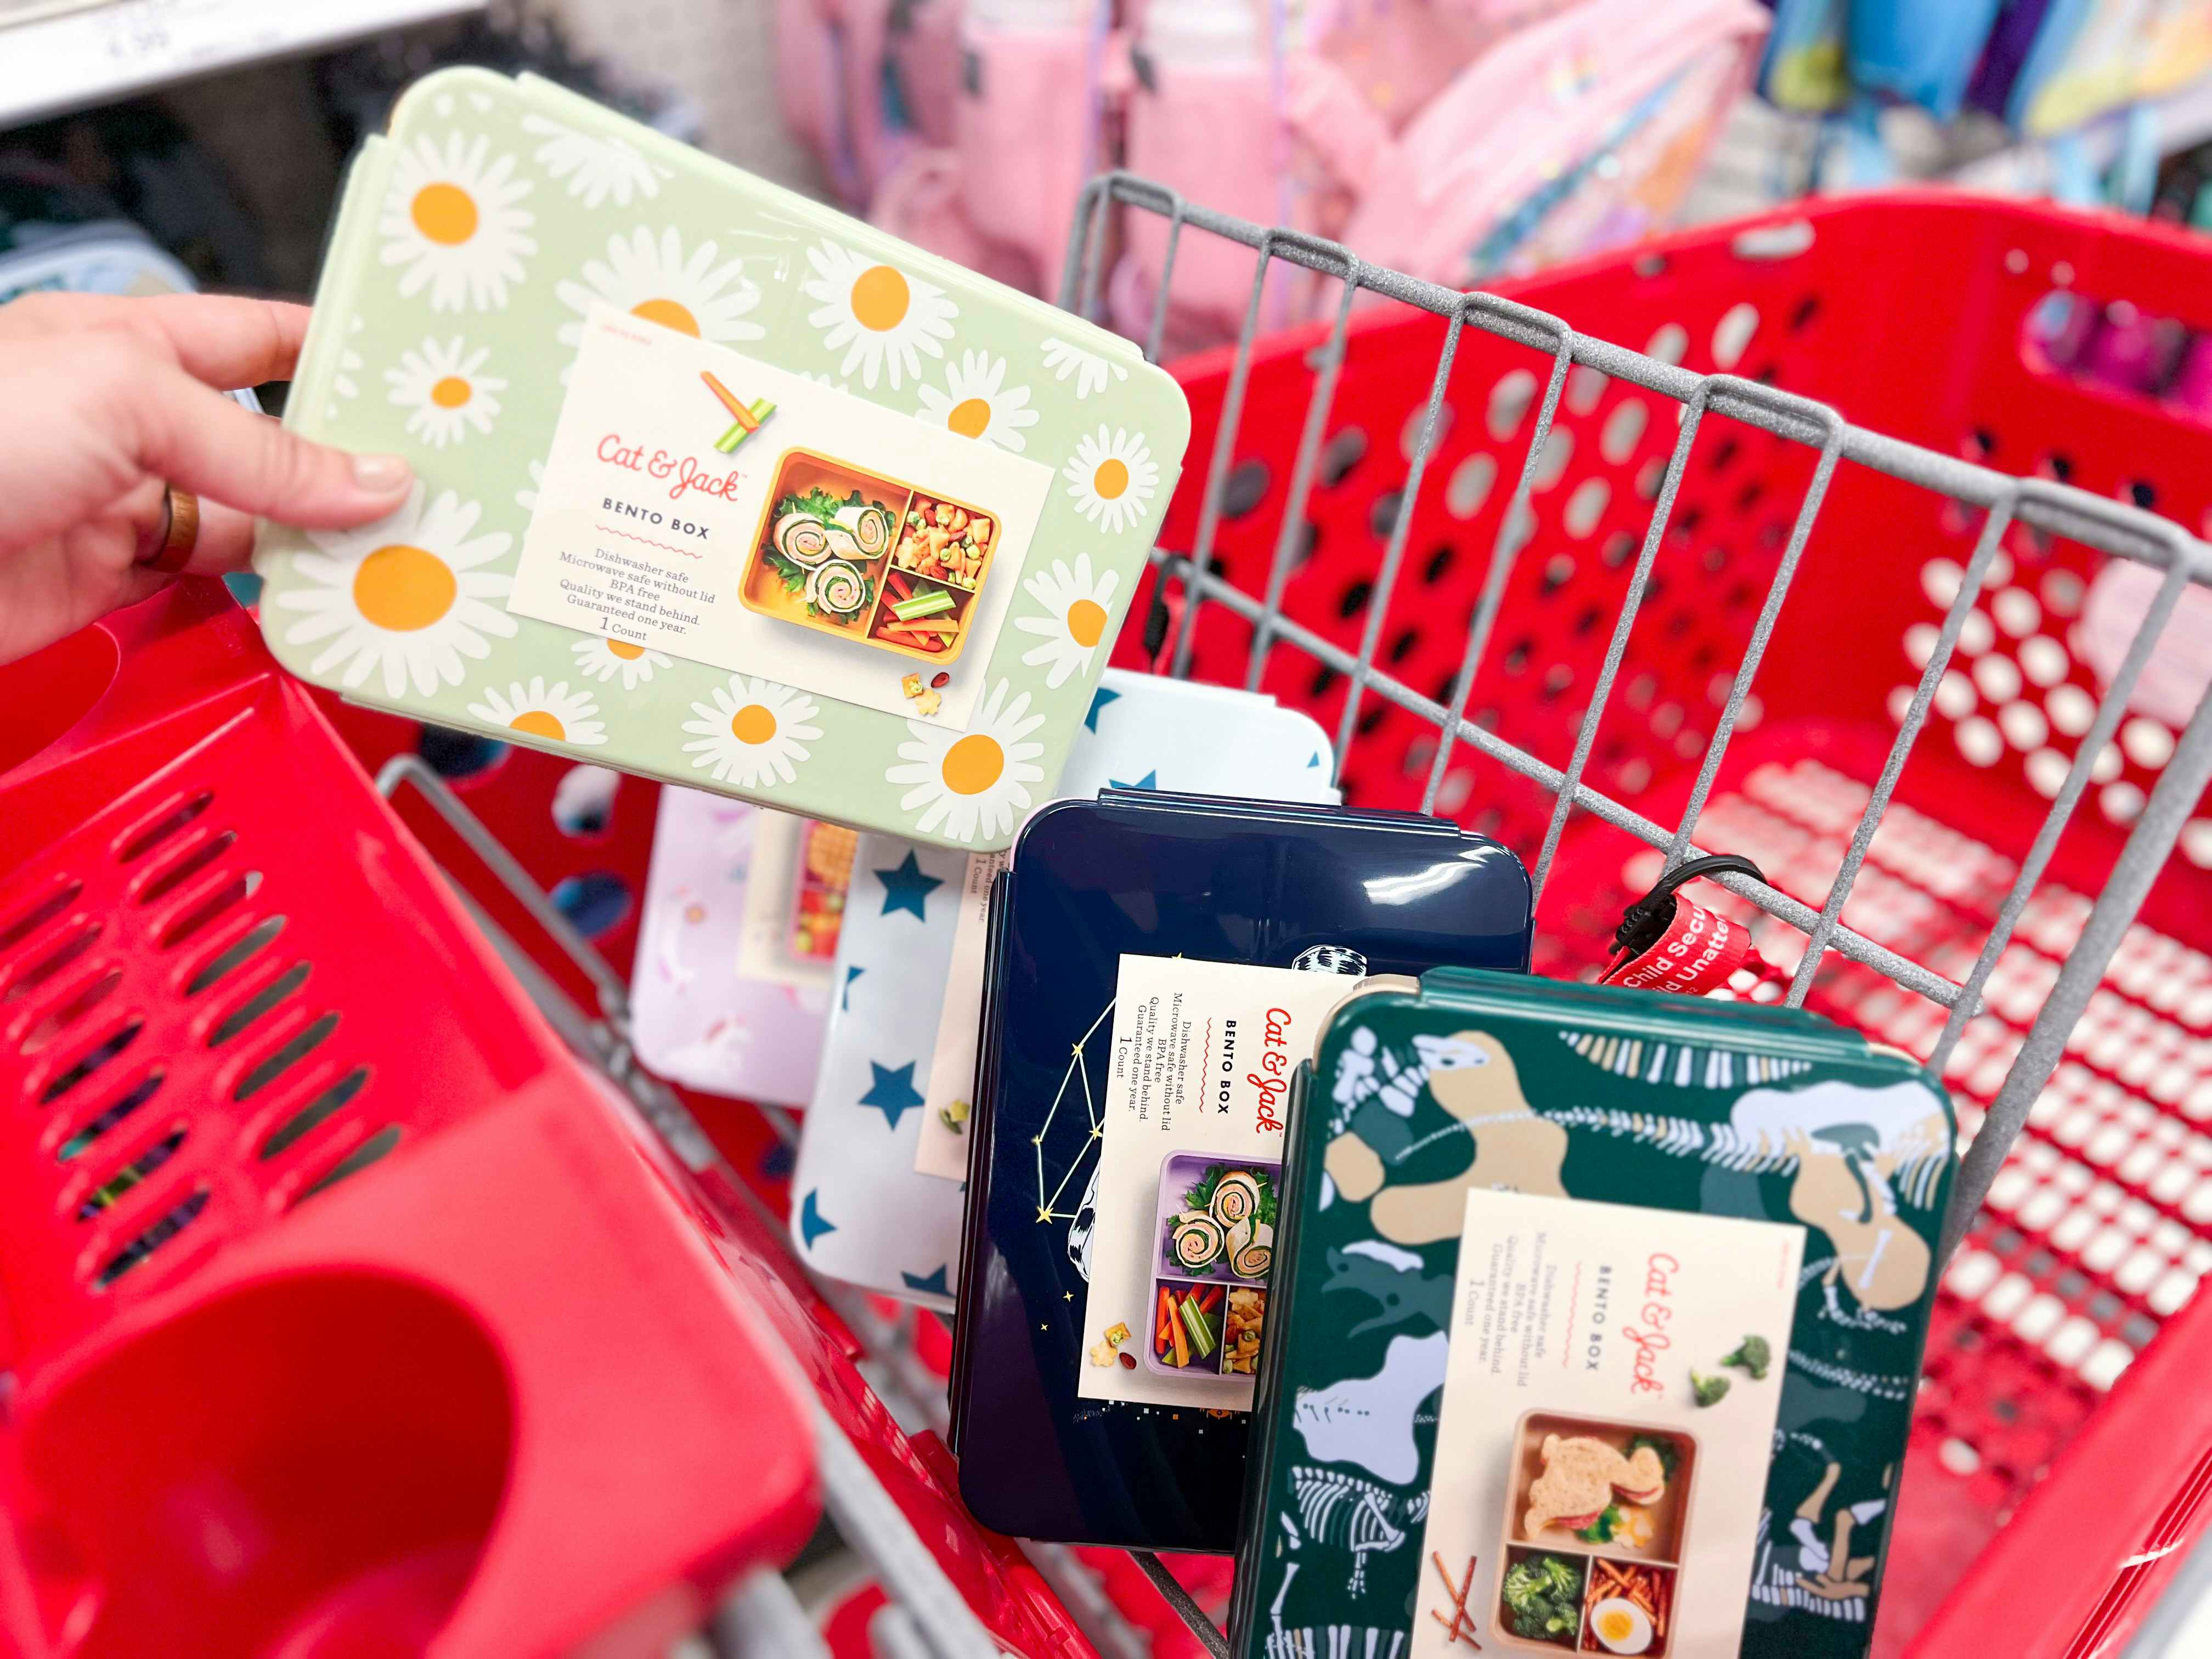 a woman's hand putting a target cat and jack bento box with daisies on it into her shopping cart with three other bento boxes in the cart already